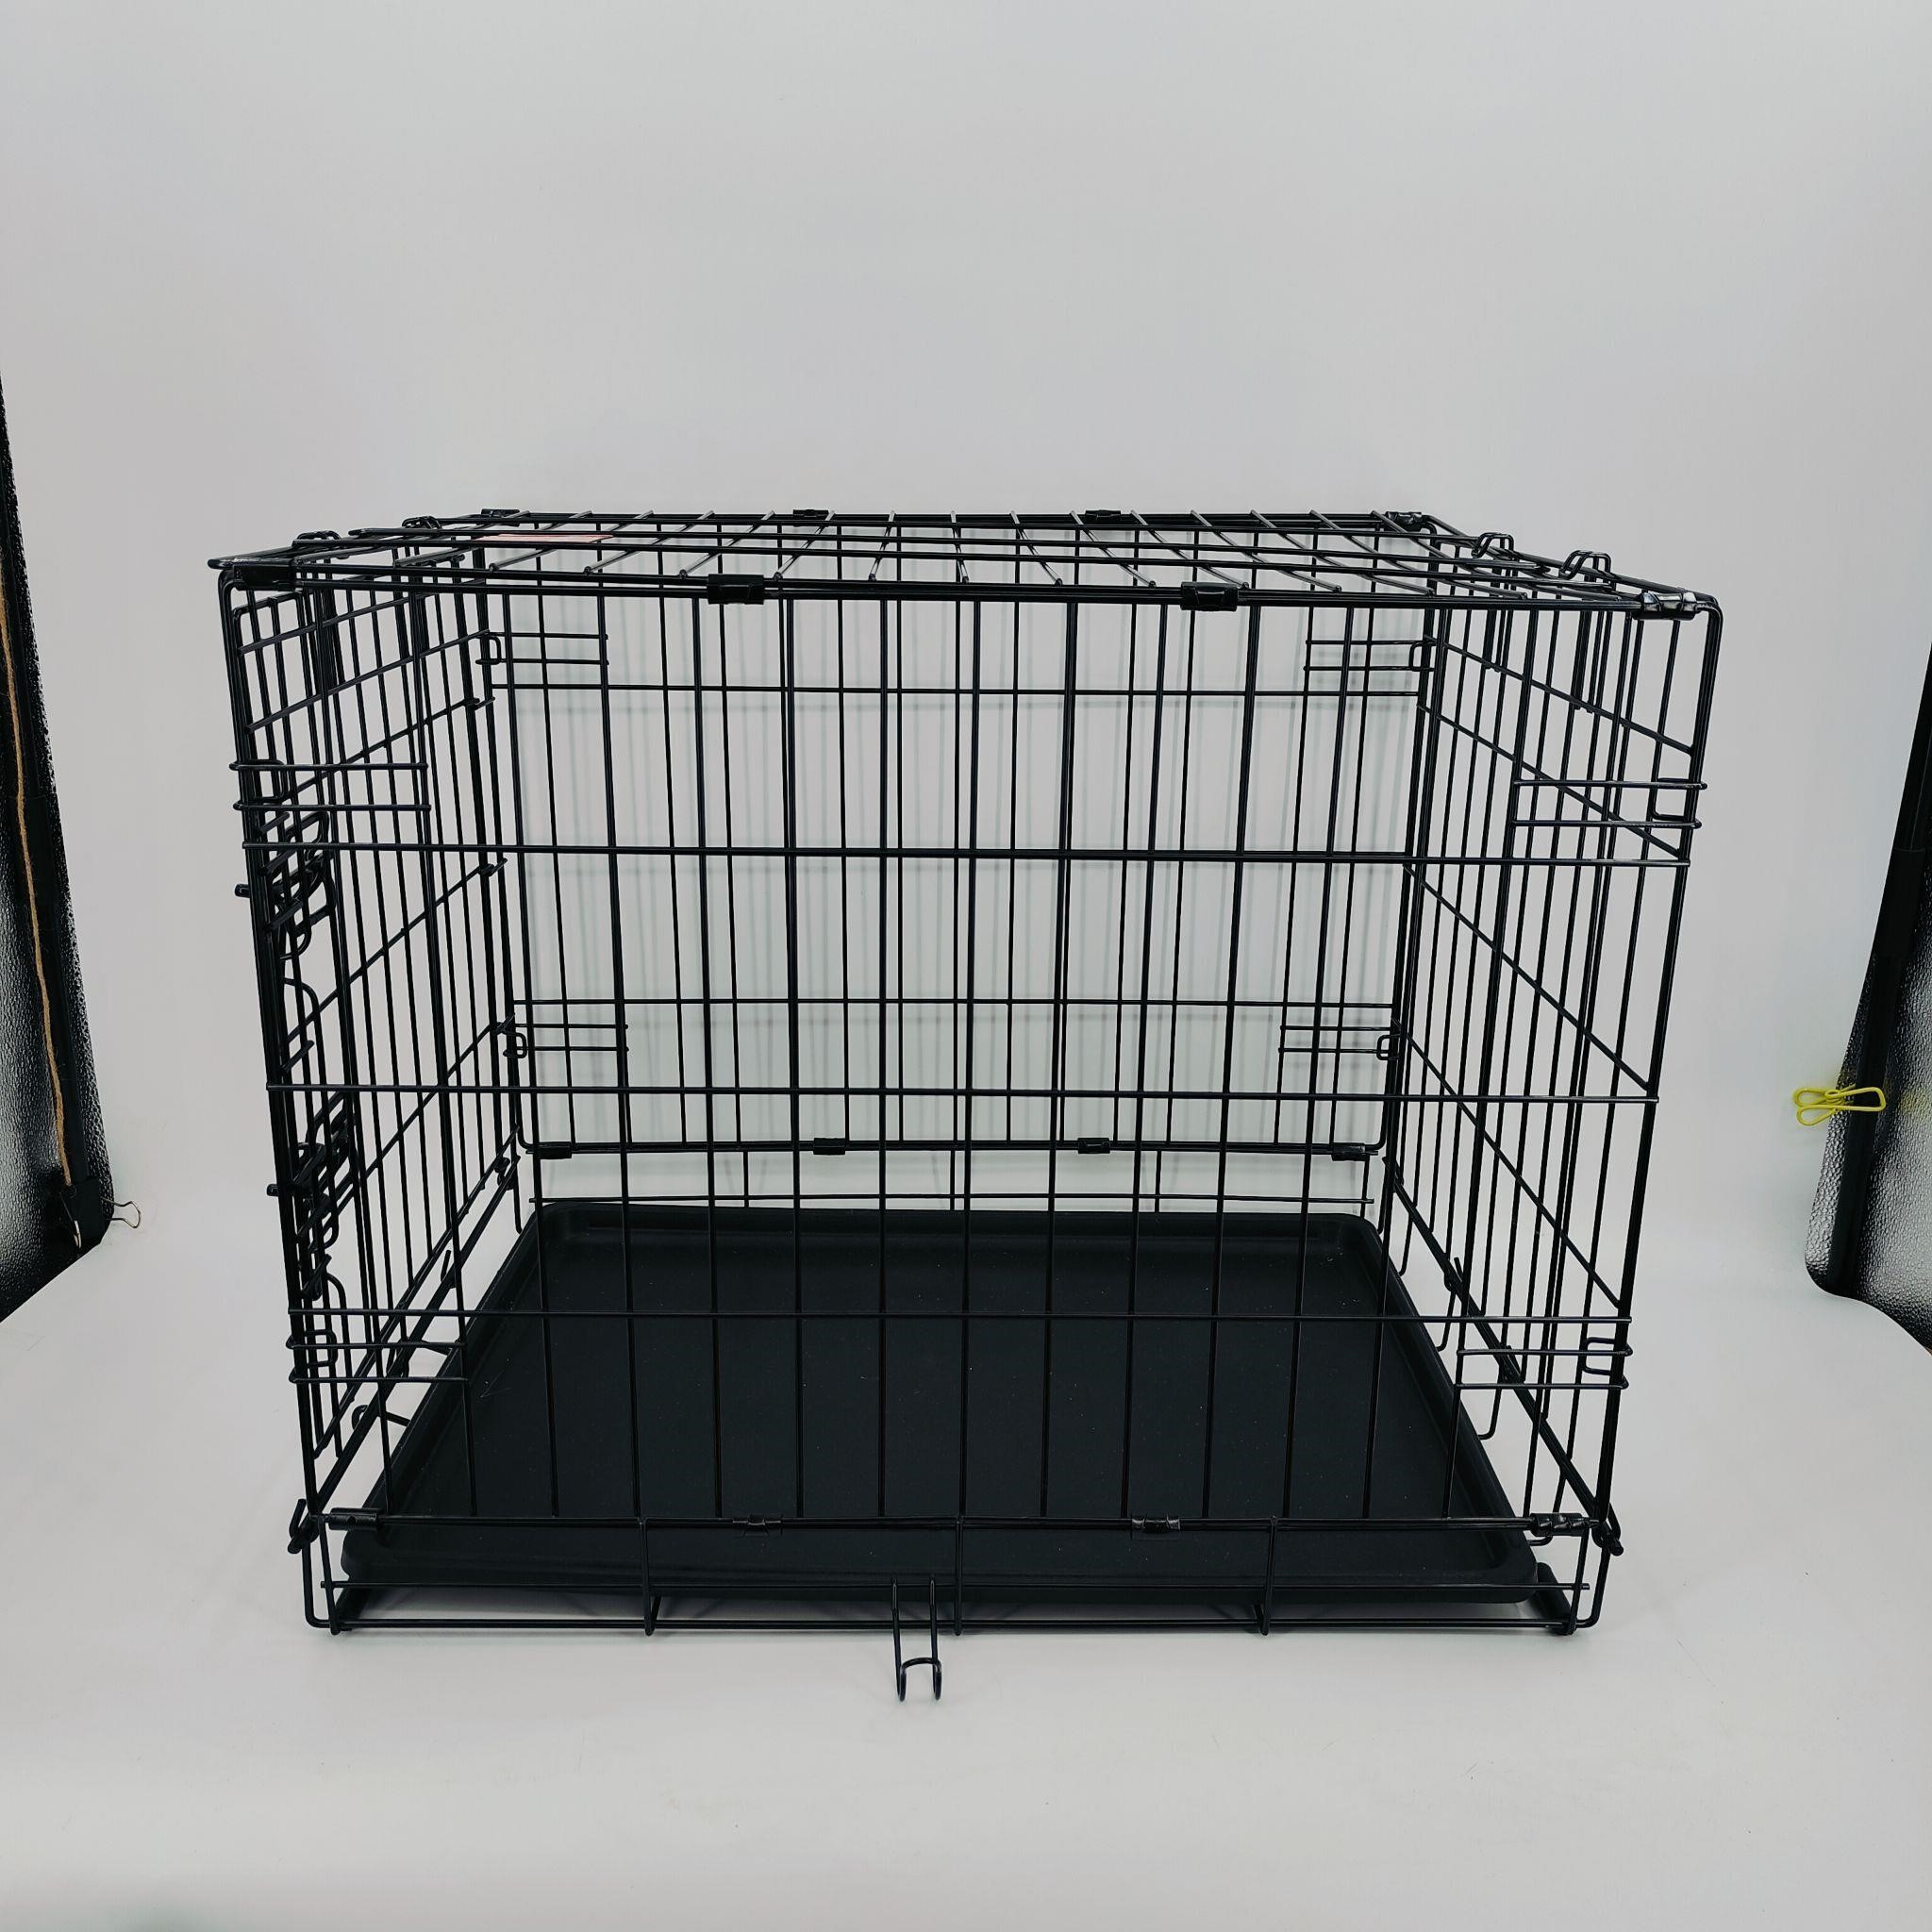 Small Collapsible Dog/Cat Crate